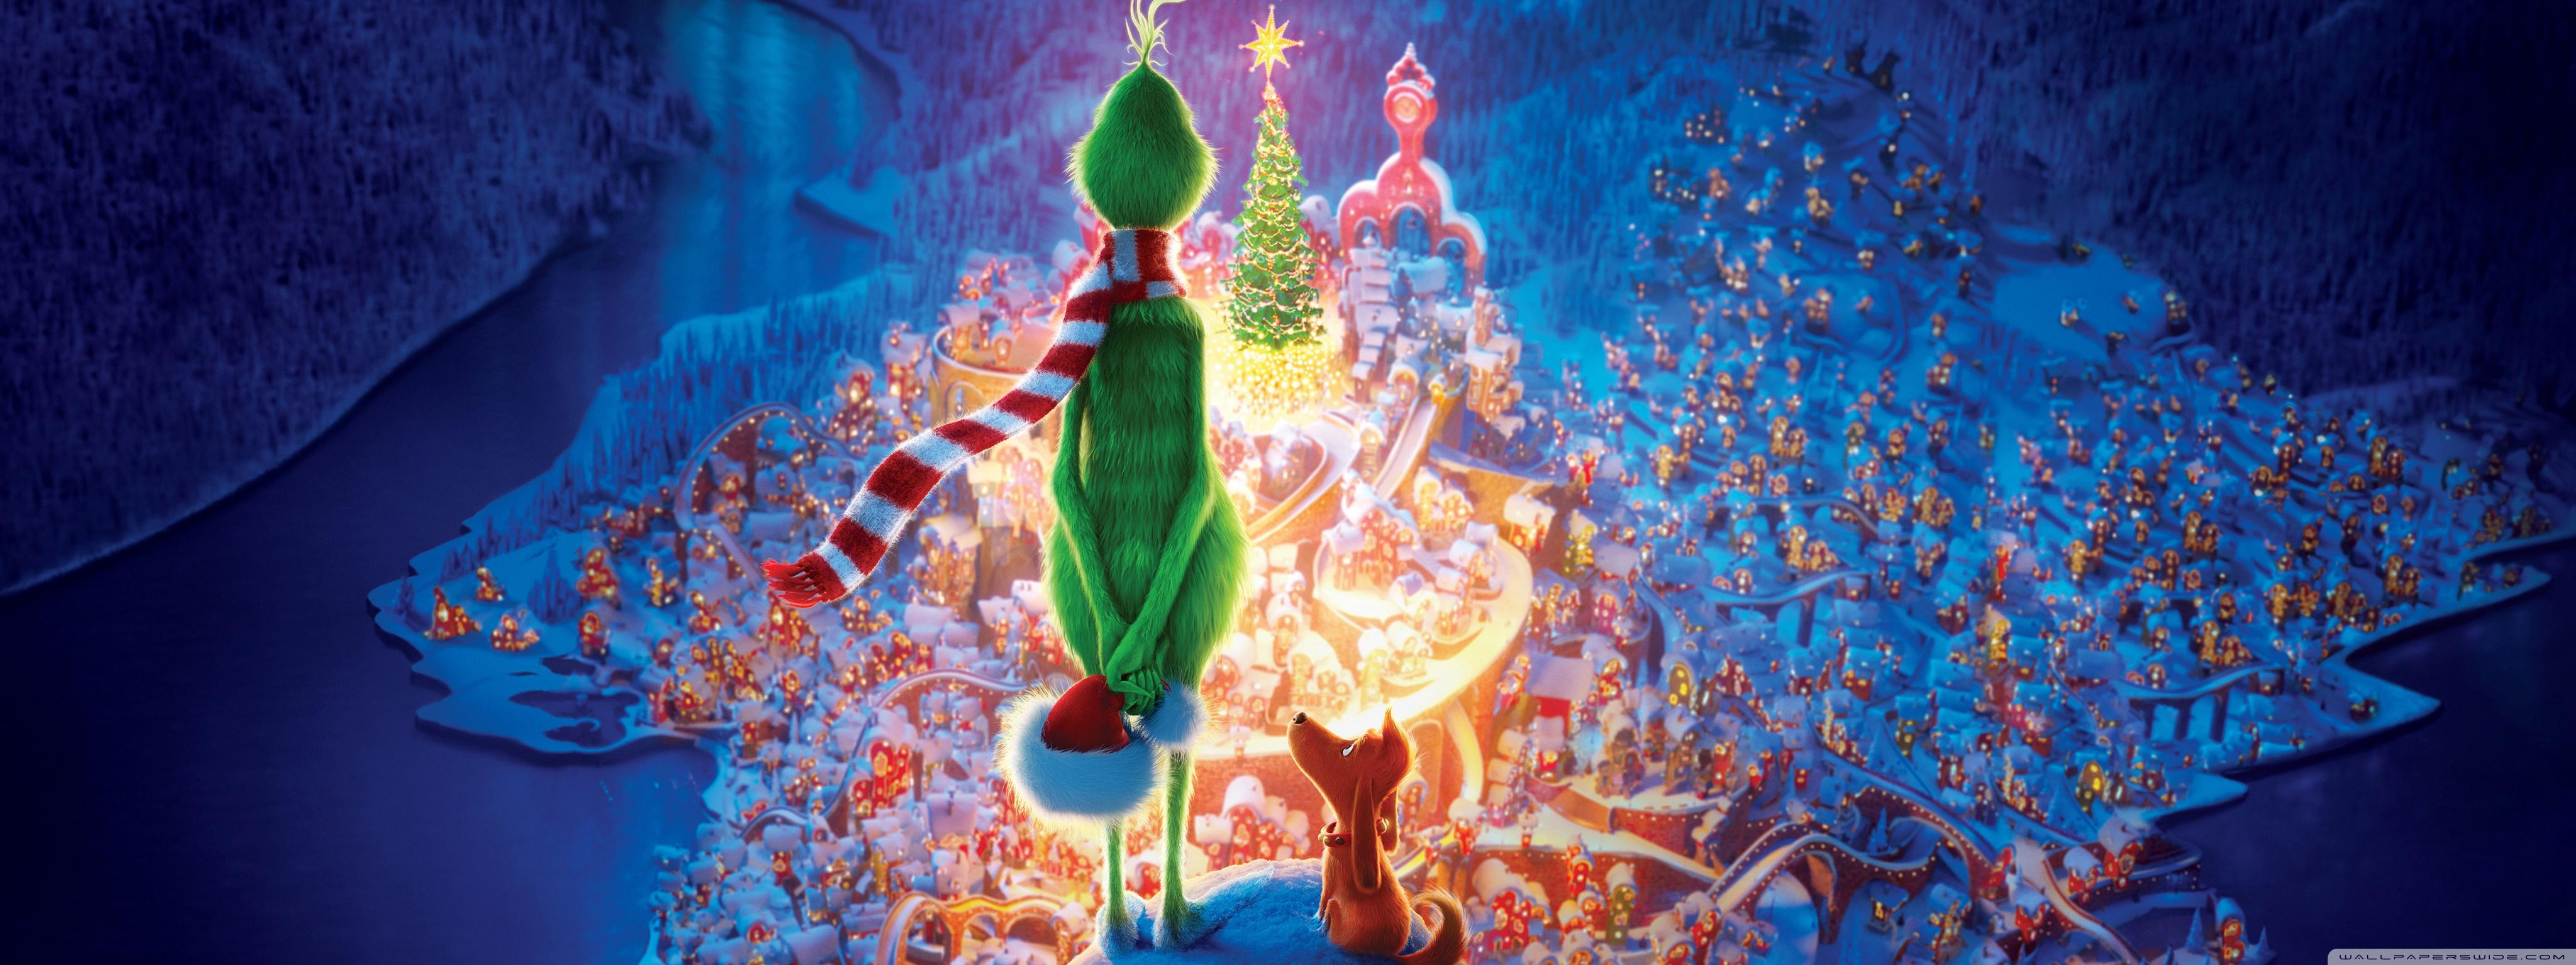 The Grinch Christmas Holiday Movie Ultra HD Desktop